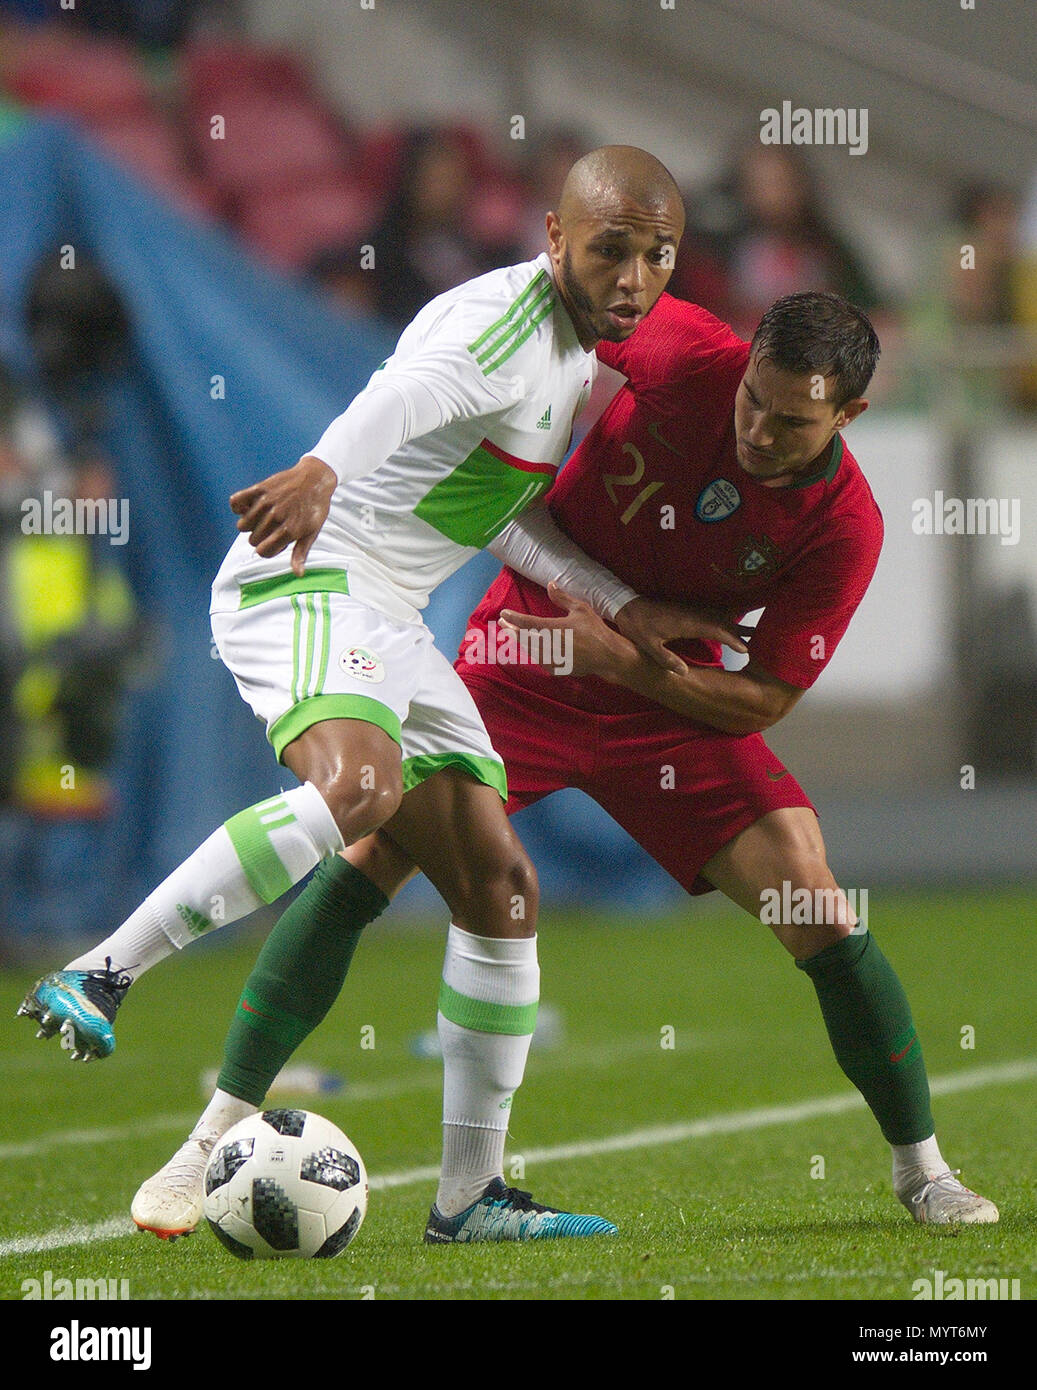 Lisbon, Portugal. 7th June, 2018. Cedric Soares (R) of Portugal vies with Yacine Brahimi of Algeria during the international friendly soccer match between Portugal and Algeria at Luz Stadium in Lisbon, Portugal, on June 7, 2018. Portugal won 3-0. Credit: Zhang Liyun/Xinhua/Alamy Live News Stock Photo